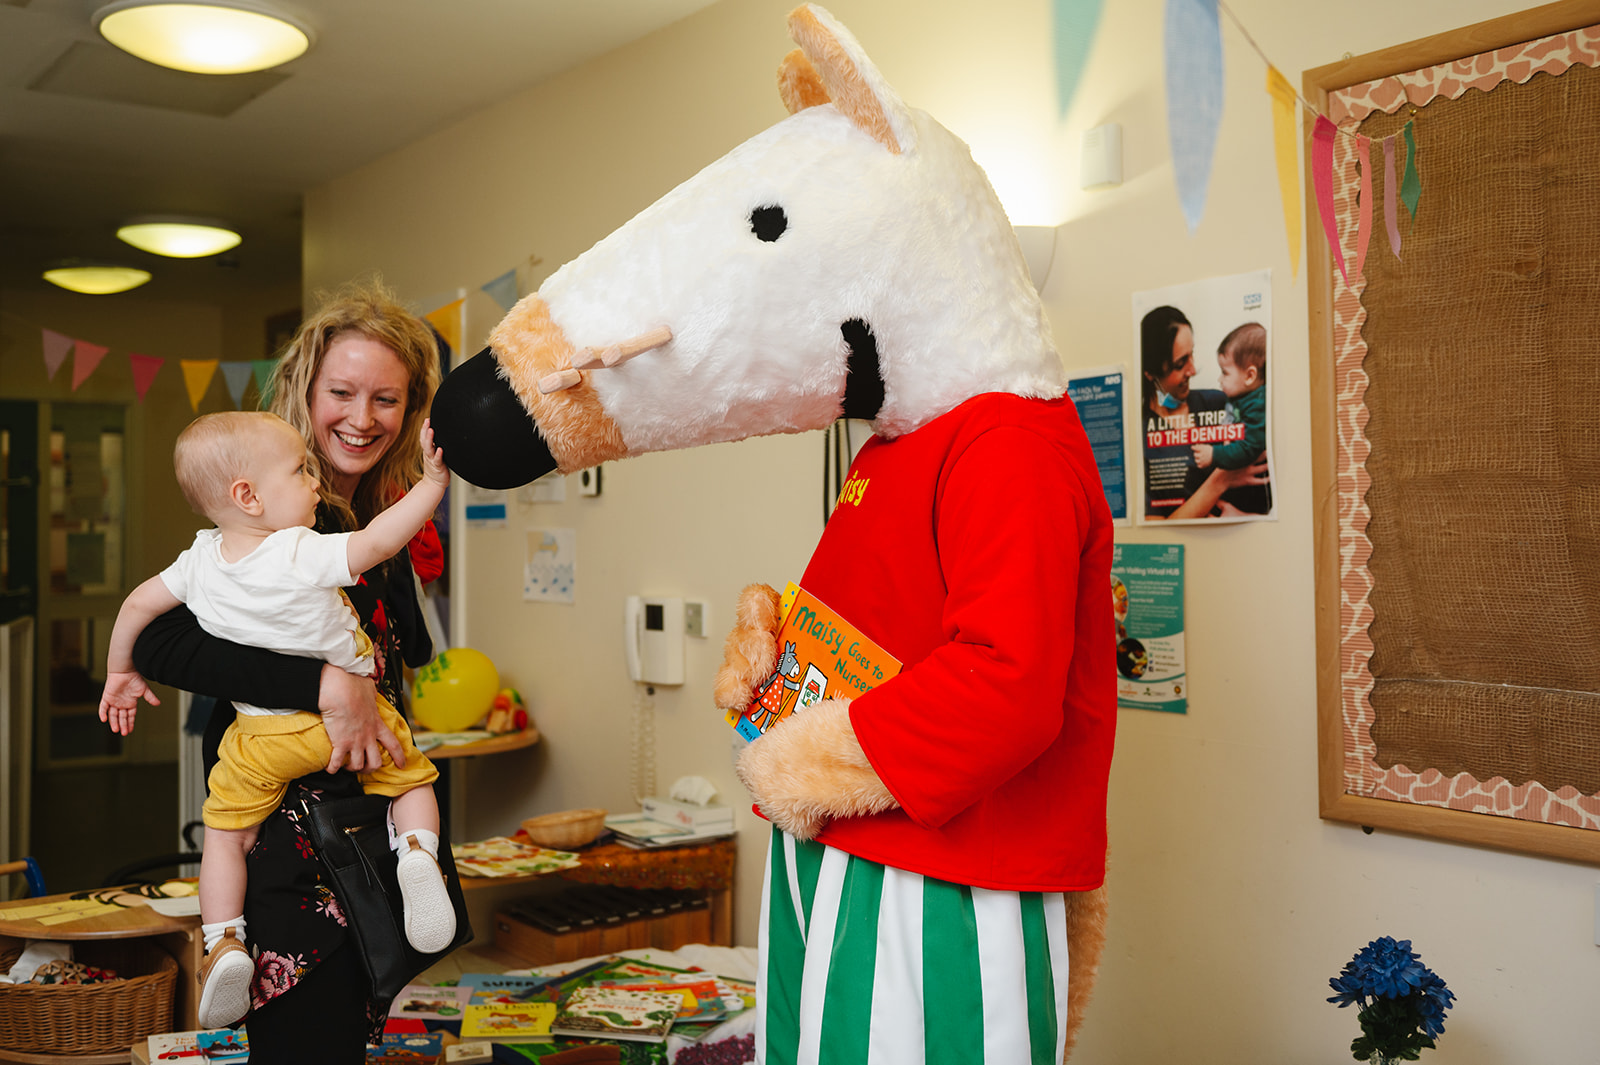 Our photography of the National Literacy Trust's summer party community children's event in Birmingham